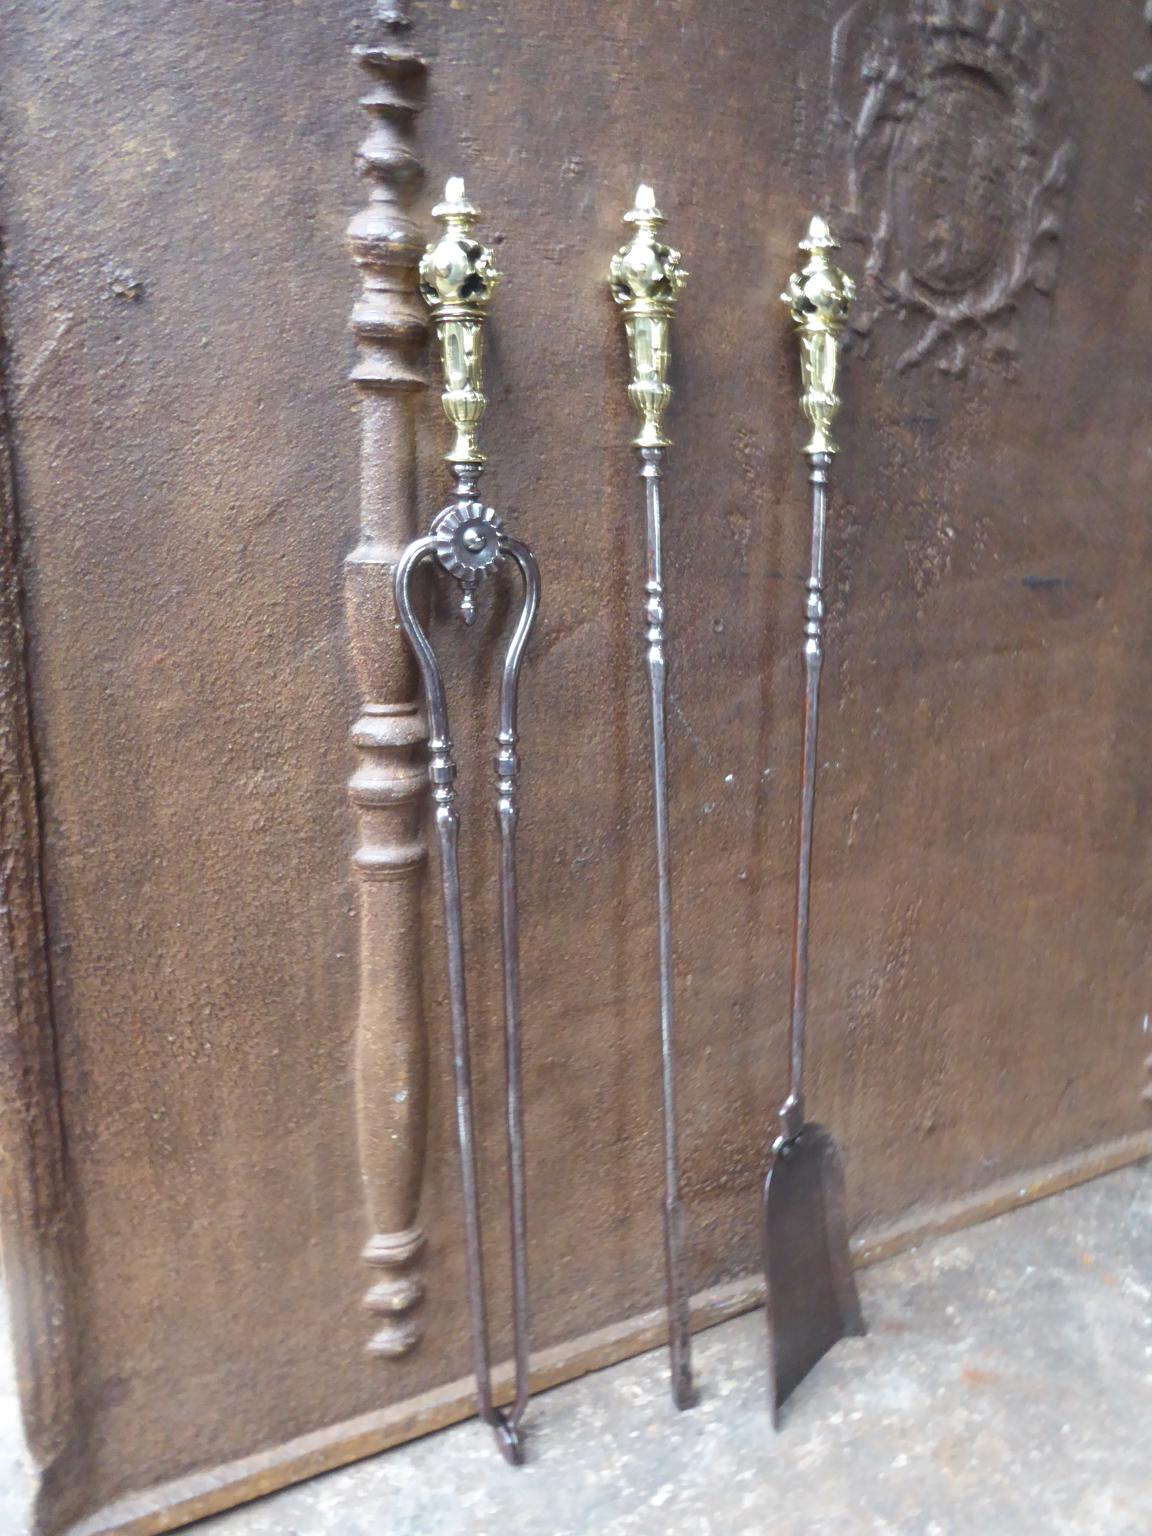 Elegant English set of three polished steel fireplace tools each with ring banded shafts
and with rare impressive polished brass handles. The fire tool set is in a good condition and is fully functional, 19th century, Victorian.

We have a unique